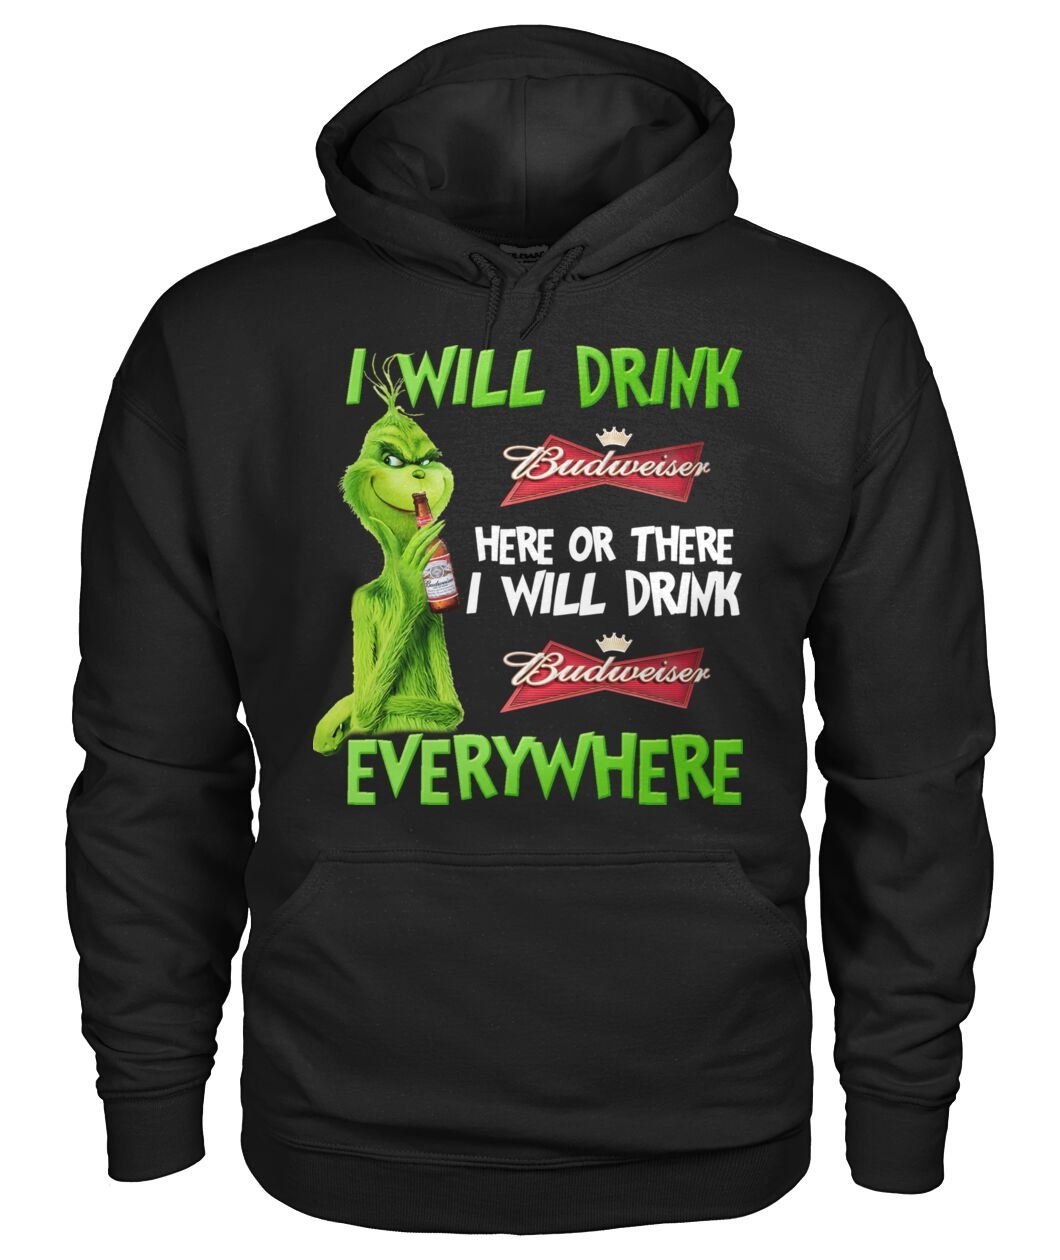 The Grinch I will drink Budweiser here or there everywhere shirt hoodie 3